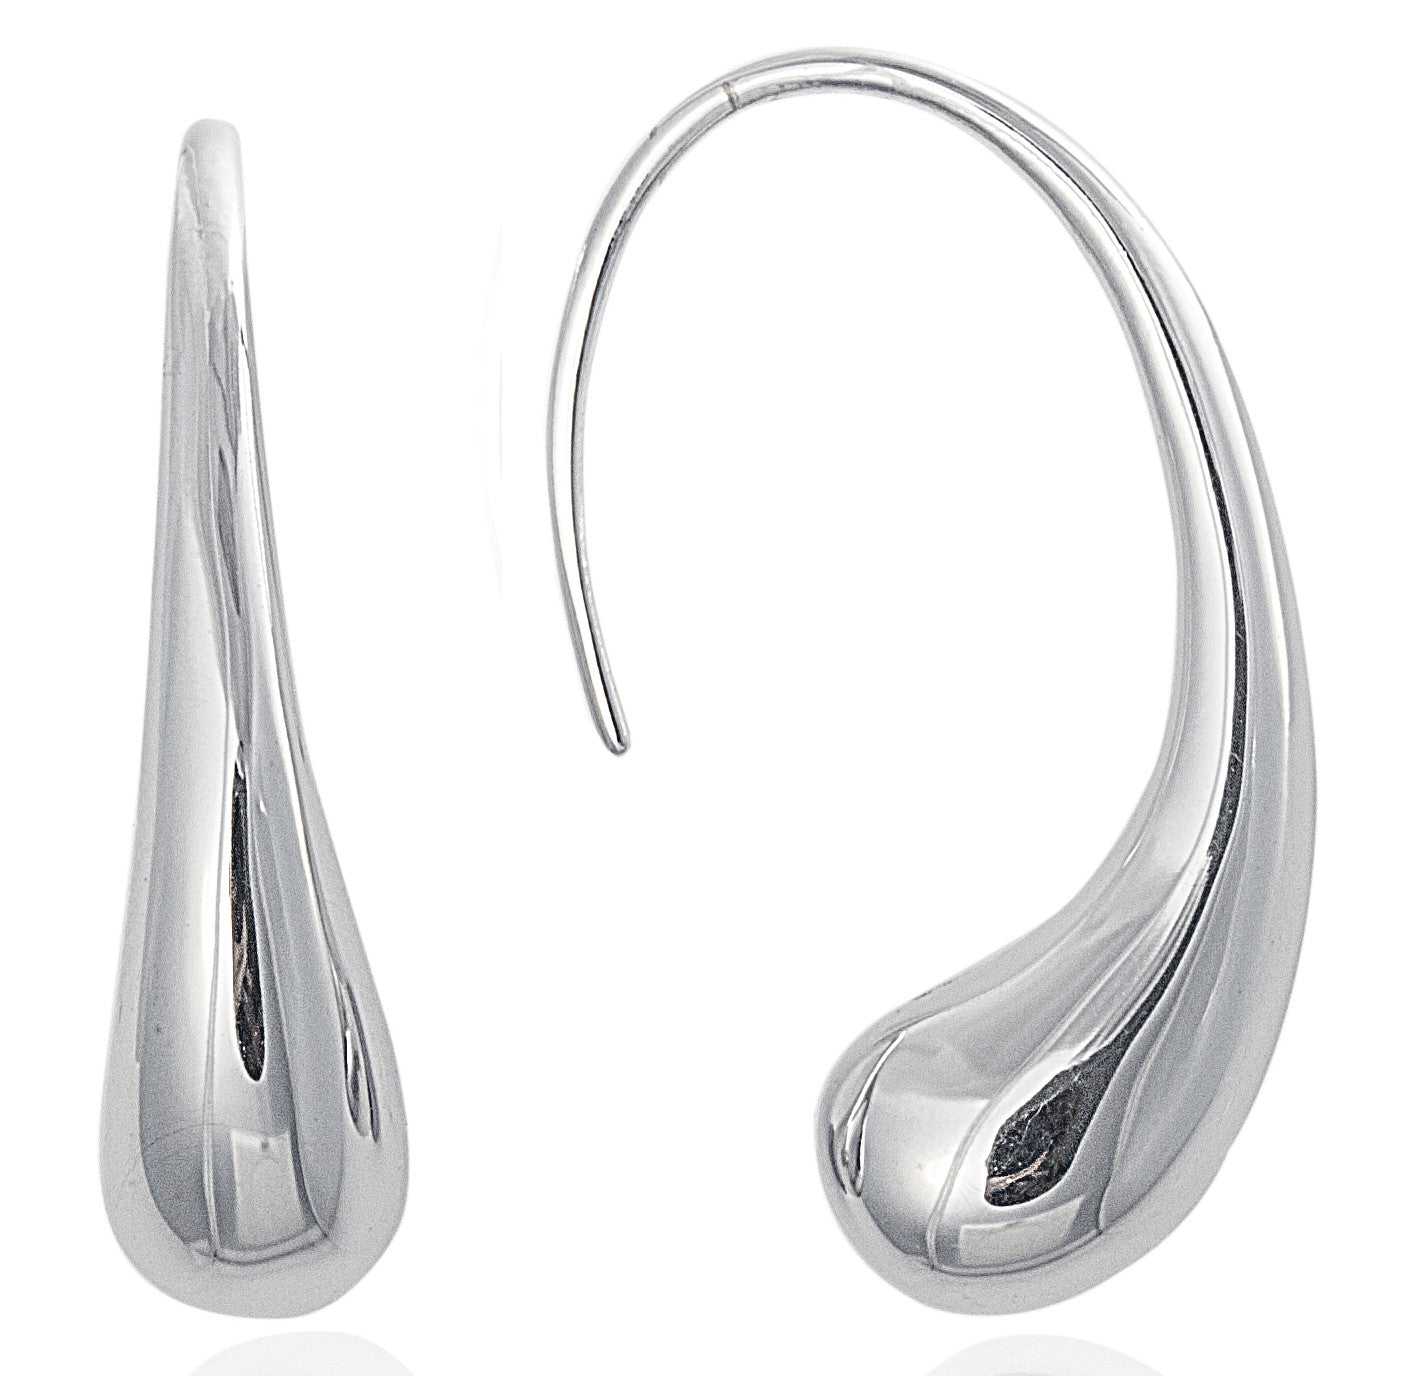 These beautiful Teardrop Earrings in 925 sterling silver feature a modern and edgy shape, yet are still classic and timeless. Luxurious jewellery that's perfect for everyday comfortable wear. Jewellery by Bellagio & Co. Worldwide shipping.